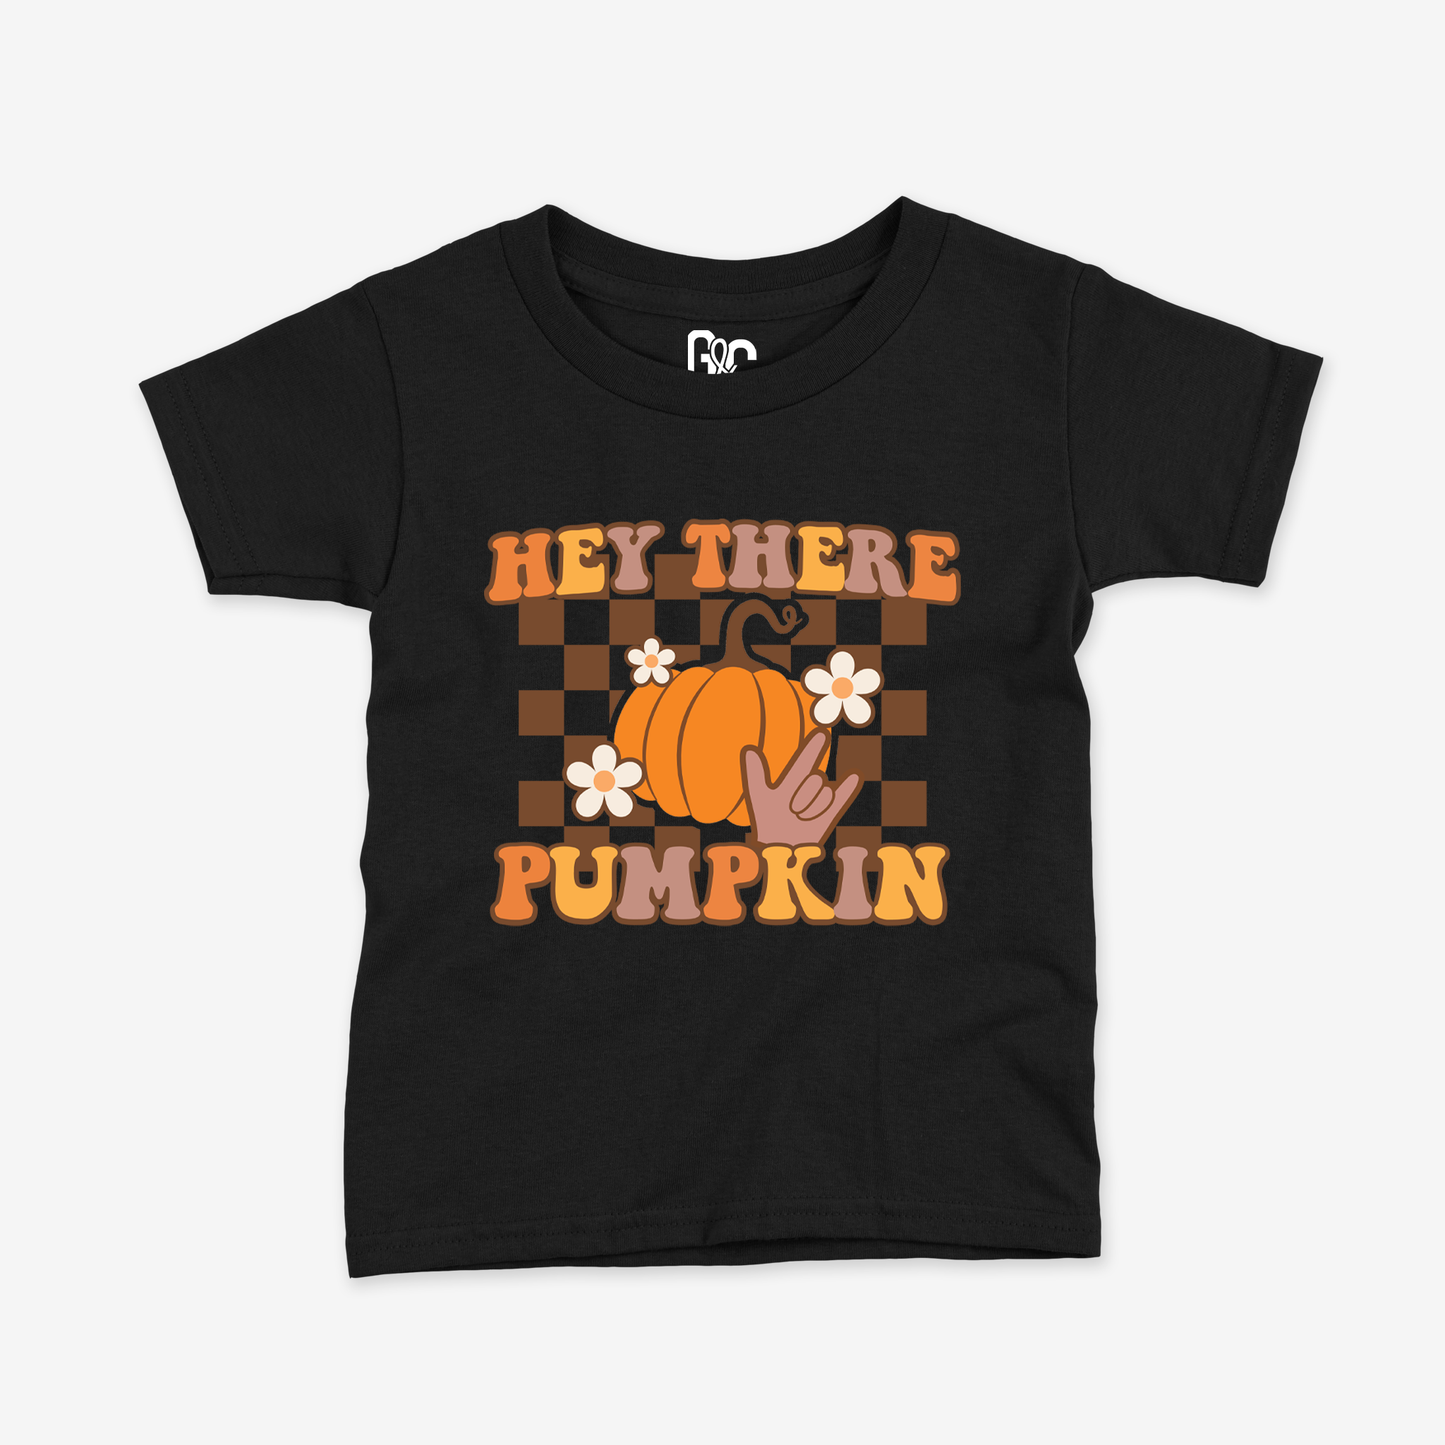 Hey there Pumpkin Toddler Tee